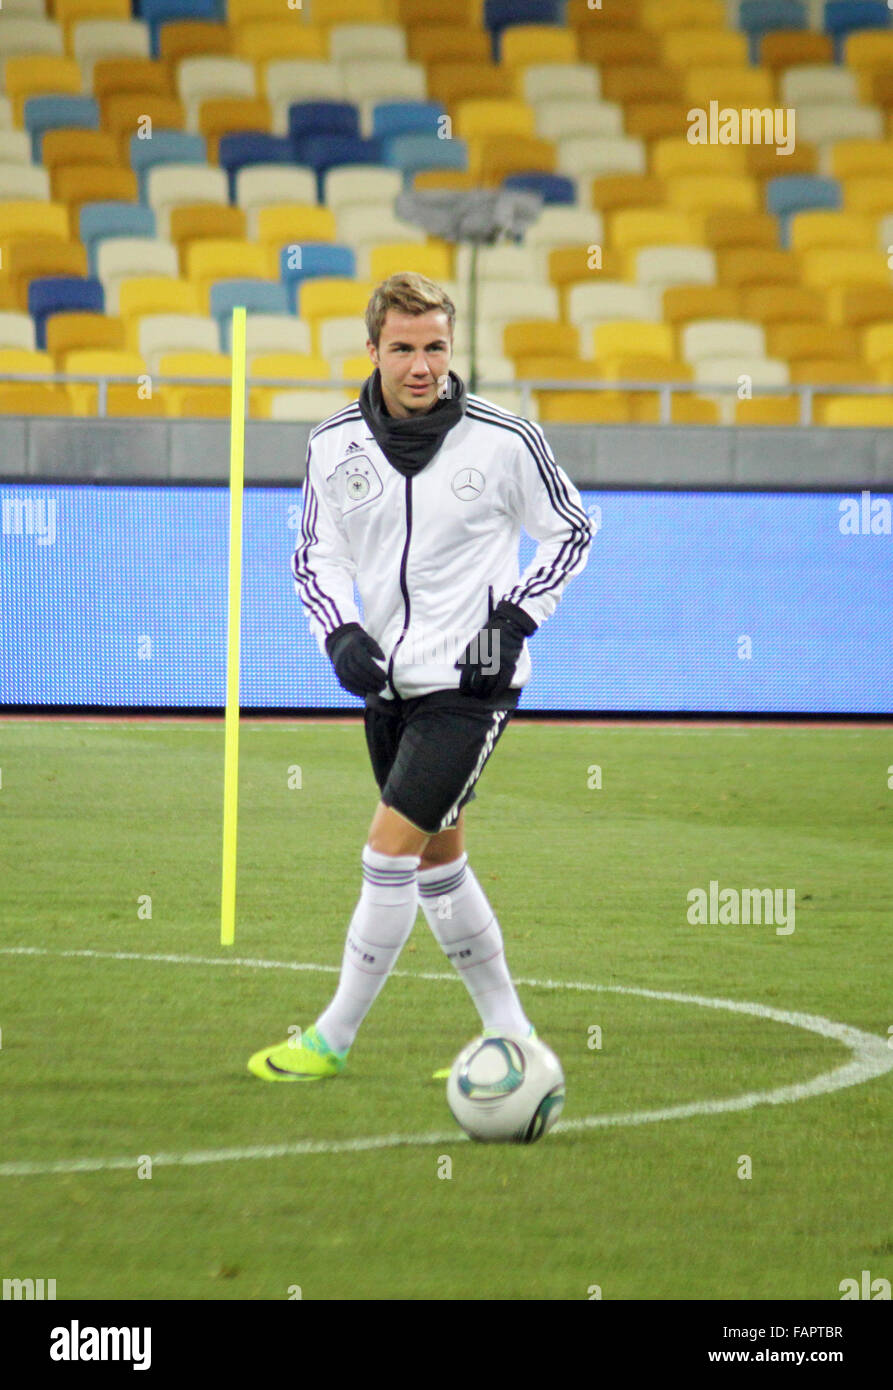 KYIV, UKRAINE - NOVEMBER 10, 2011: Mario Gotze of Germany controls a ball during training session before friendly game against Ukraine at NSK Olimpic stadium on November 10, 2011 in Kyiv, Ukraine Stock Photo